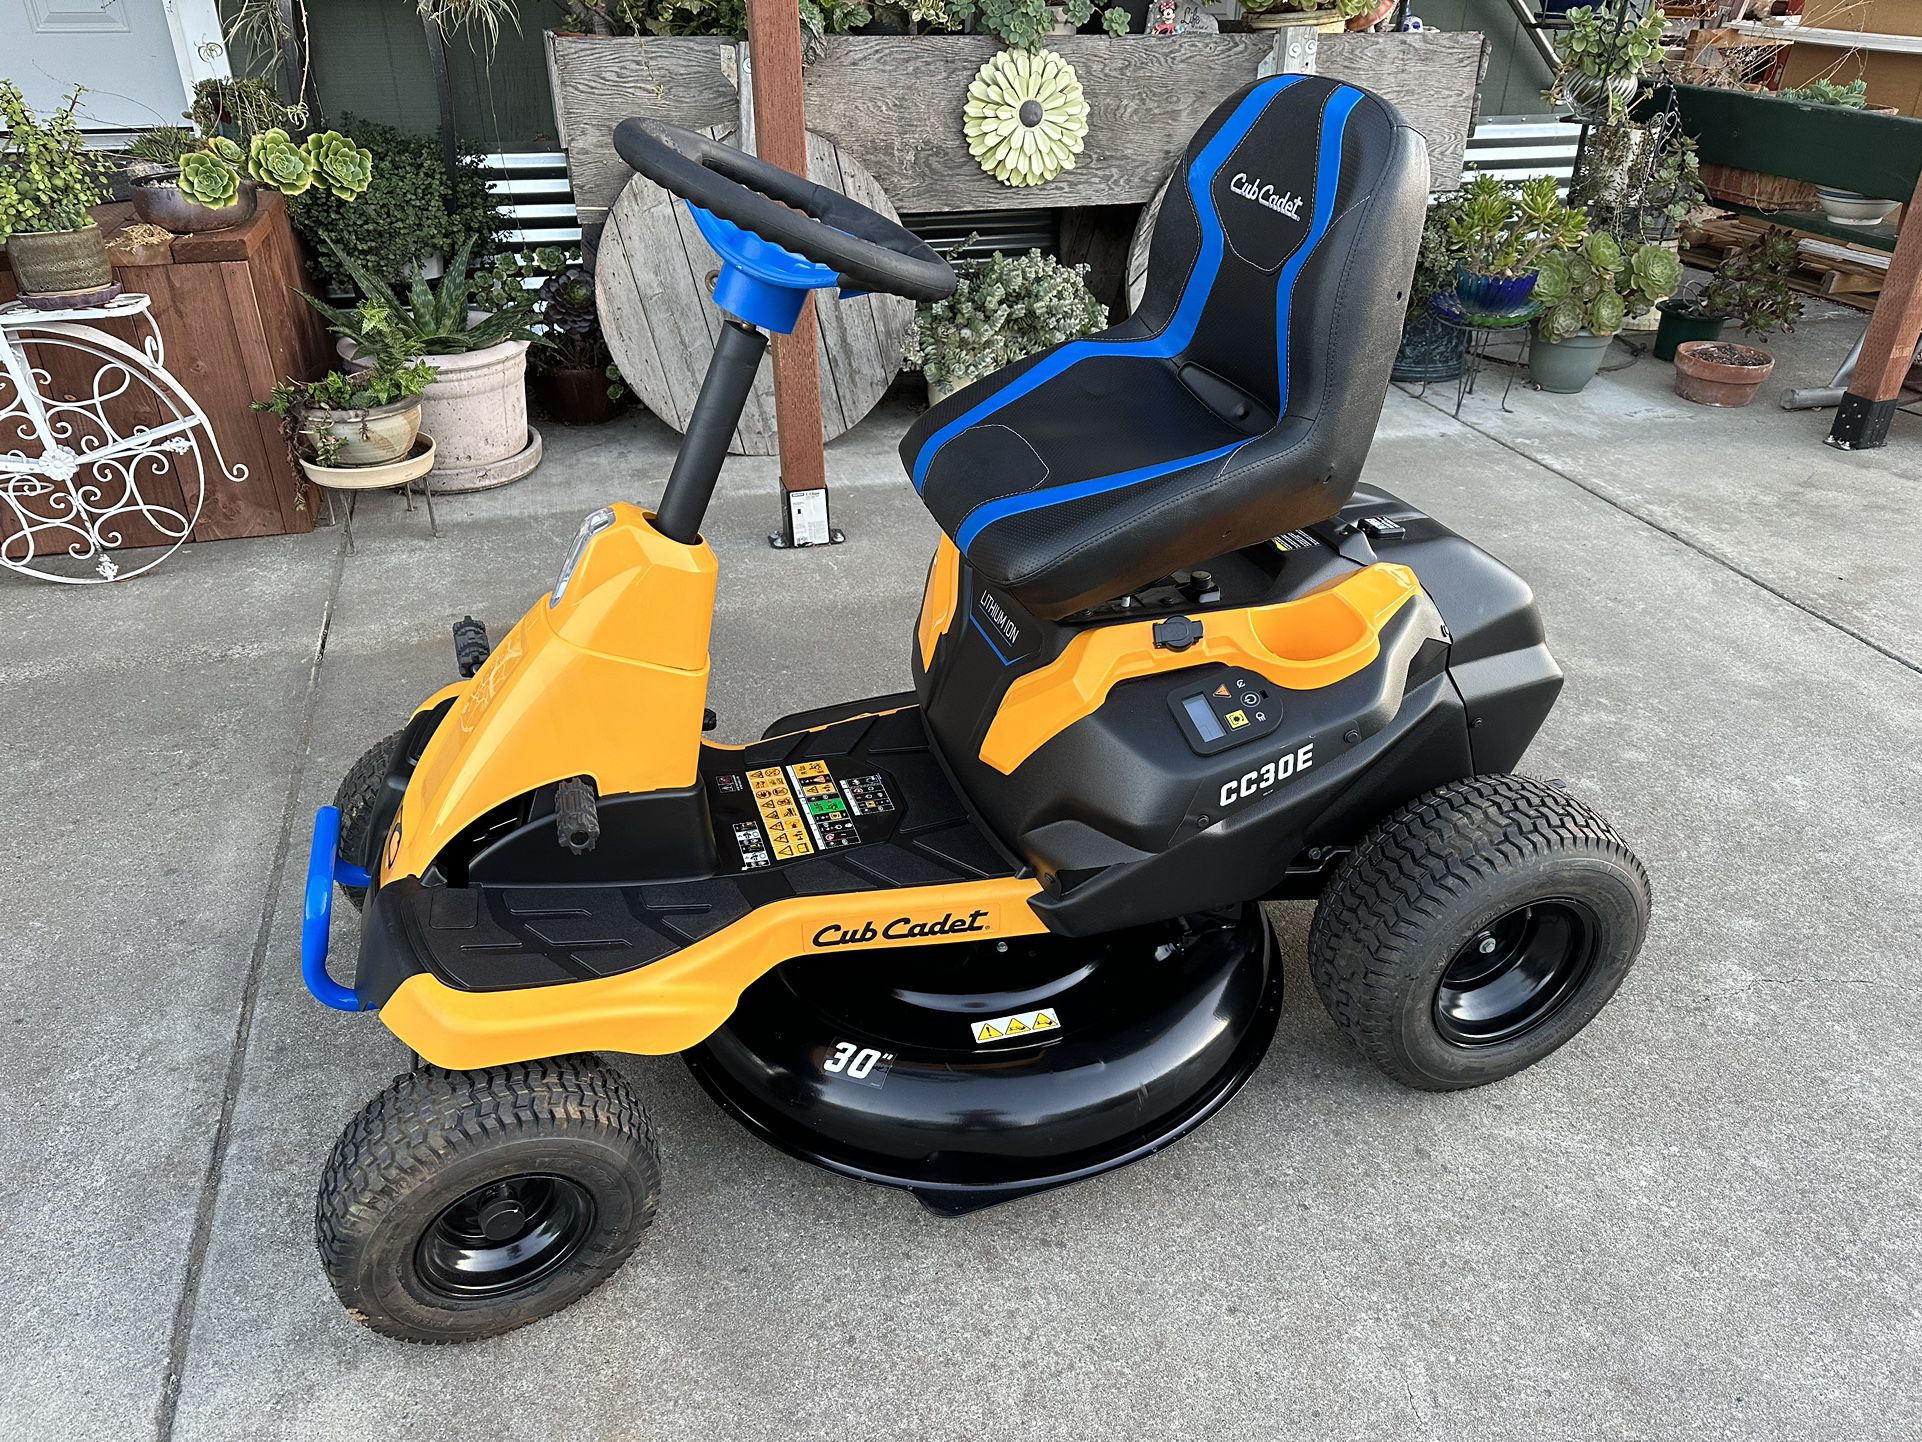 New! Cub Cadet 30 in. 56-Volt MAX 30 Ah Battery Lithium-Ion Electric Drive Cordless Riding Lawn Tractor with Mulch Kit Included